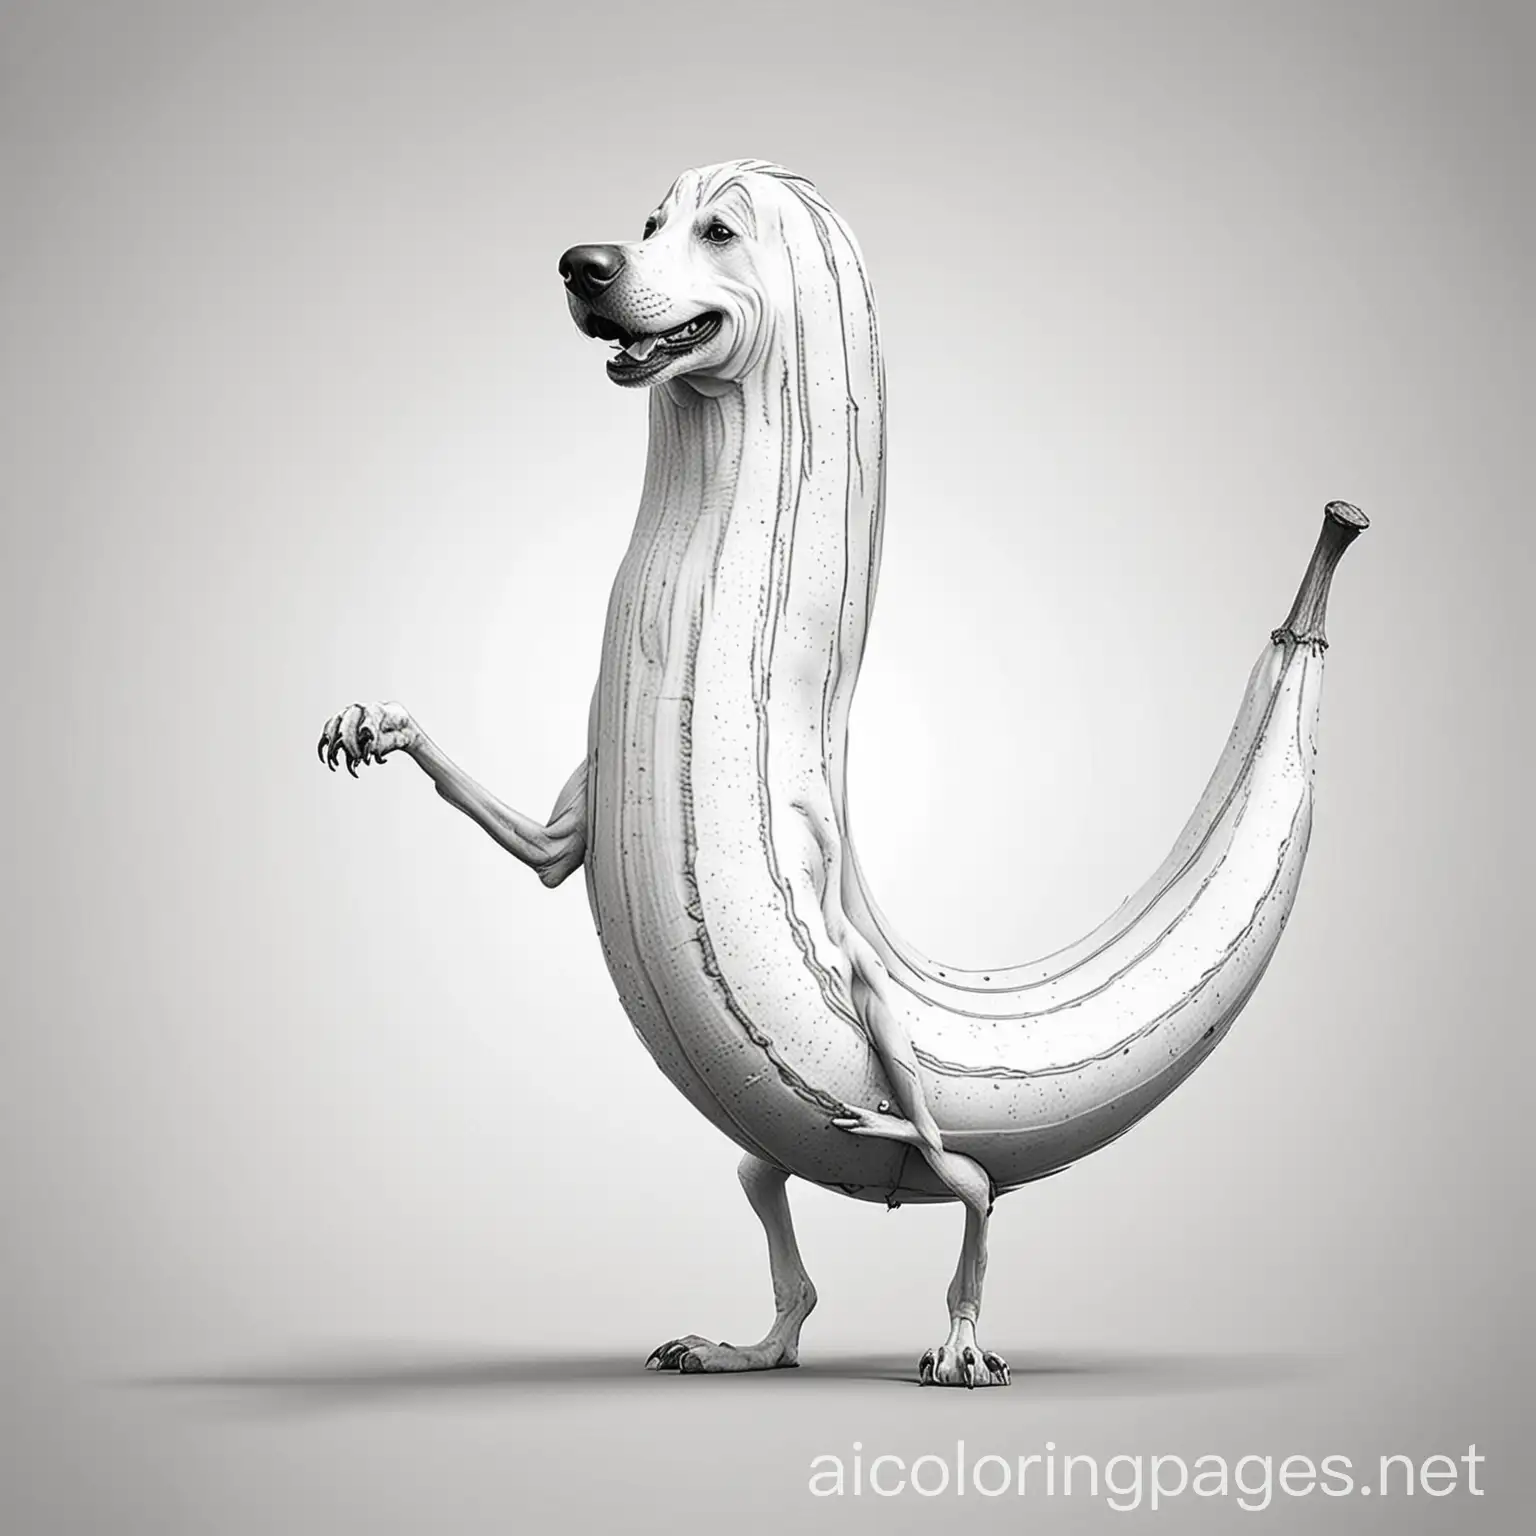 giant mutated banana fused with a dog, Coloring Page, black and white, line art, white background, Simplicity, Ample White Space. The background of the coloring page is plain white to make it easy for young children to color within the lines. The outlines of all the subjects are easy to distinguish, making it simple for kids to color without too much difficulty